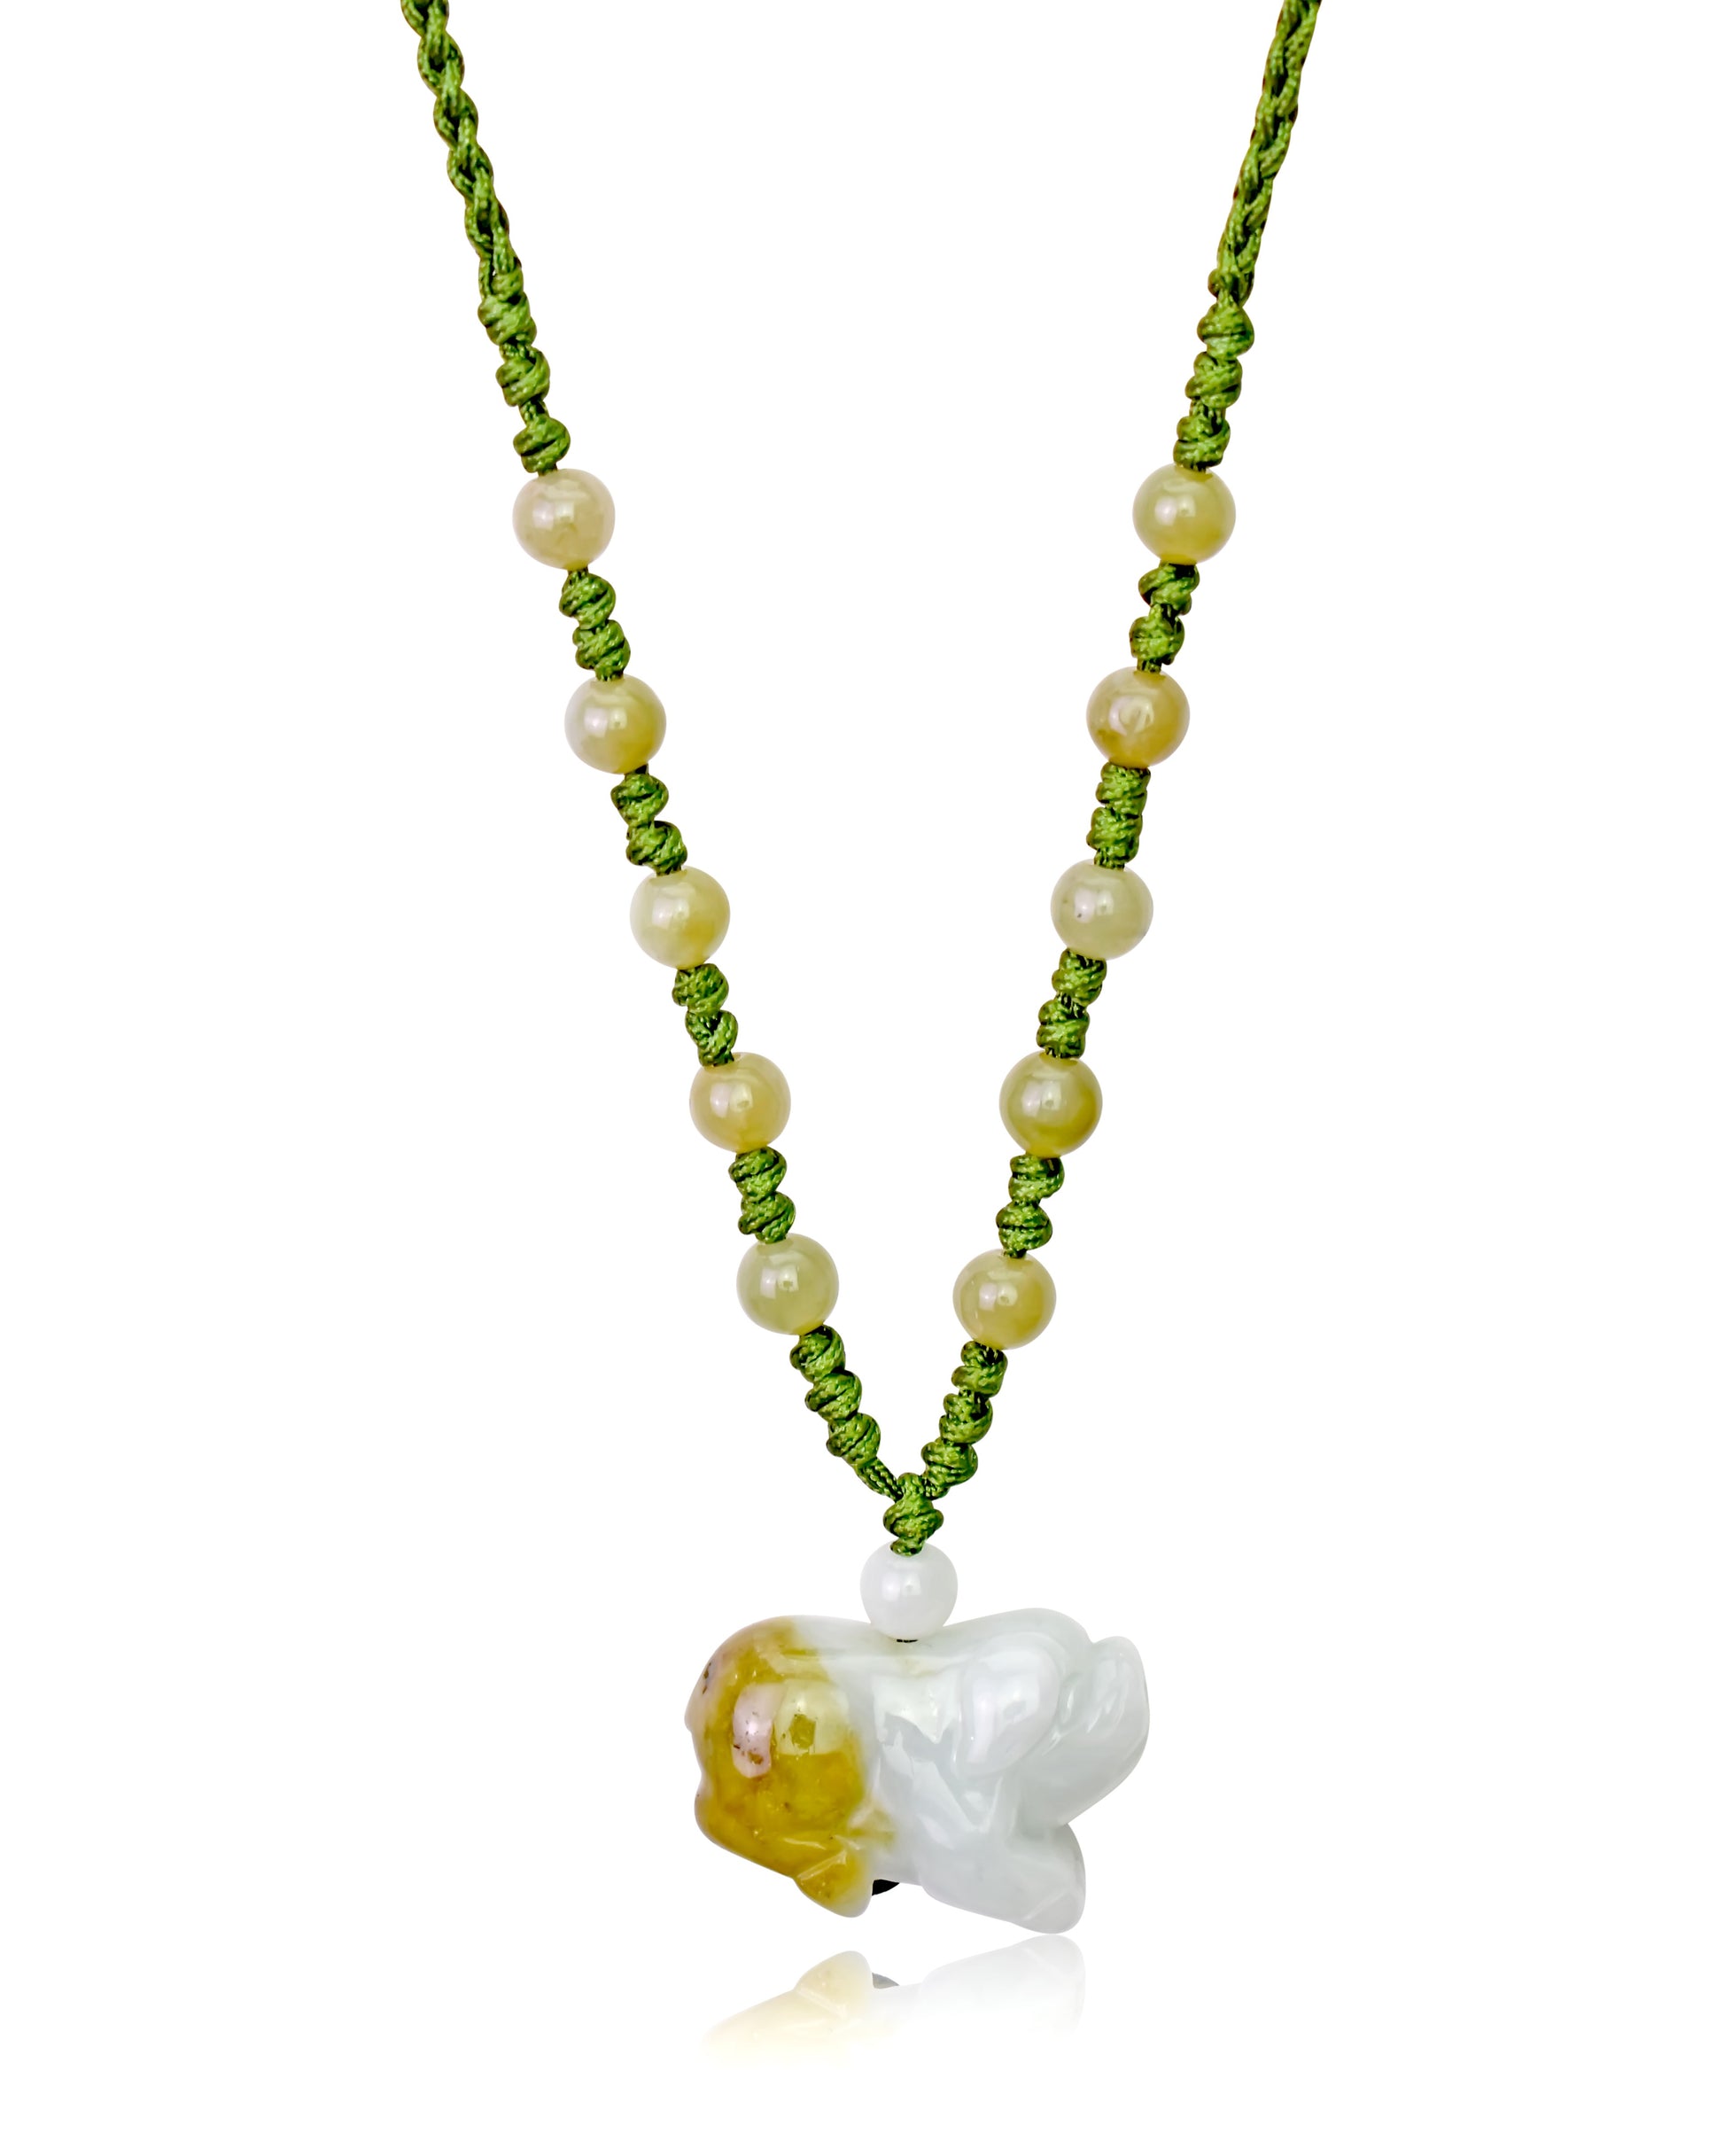 Show Off Your Boar Pride with a Handmade Jade Necklace